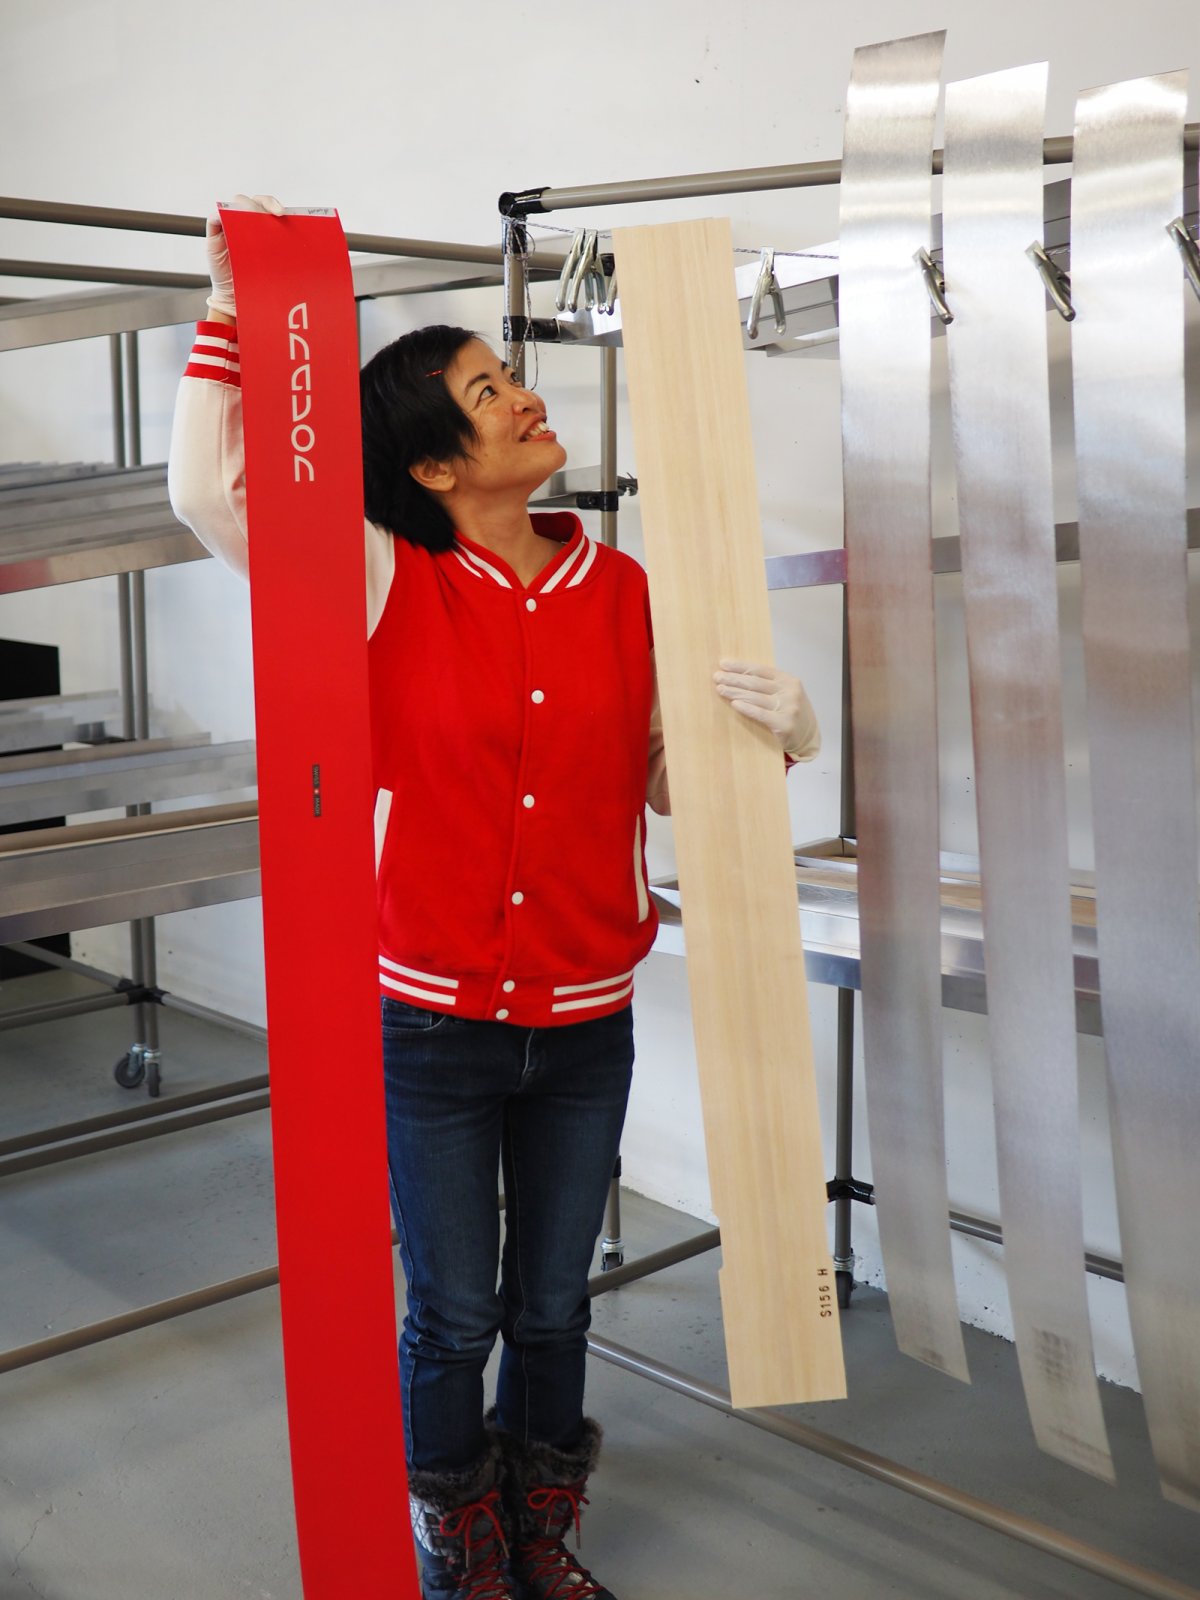 Build your own skis at the Anavon Ski-Building Workshop in Disentis